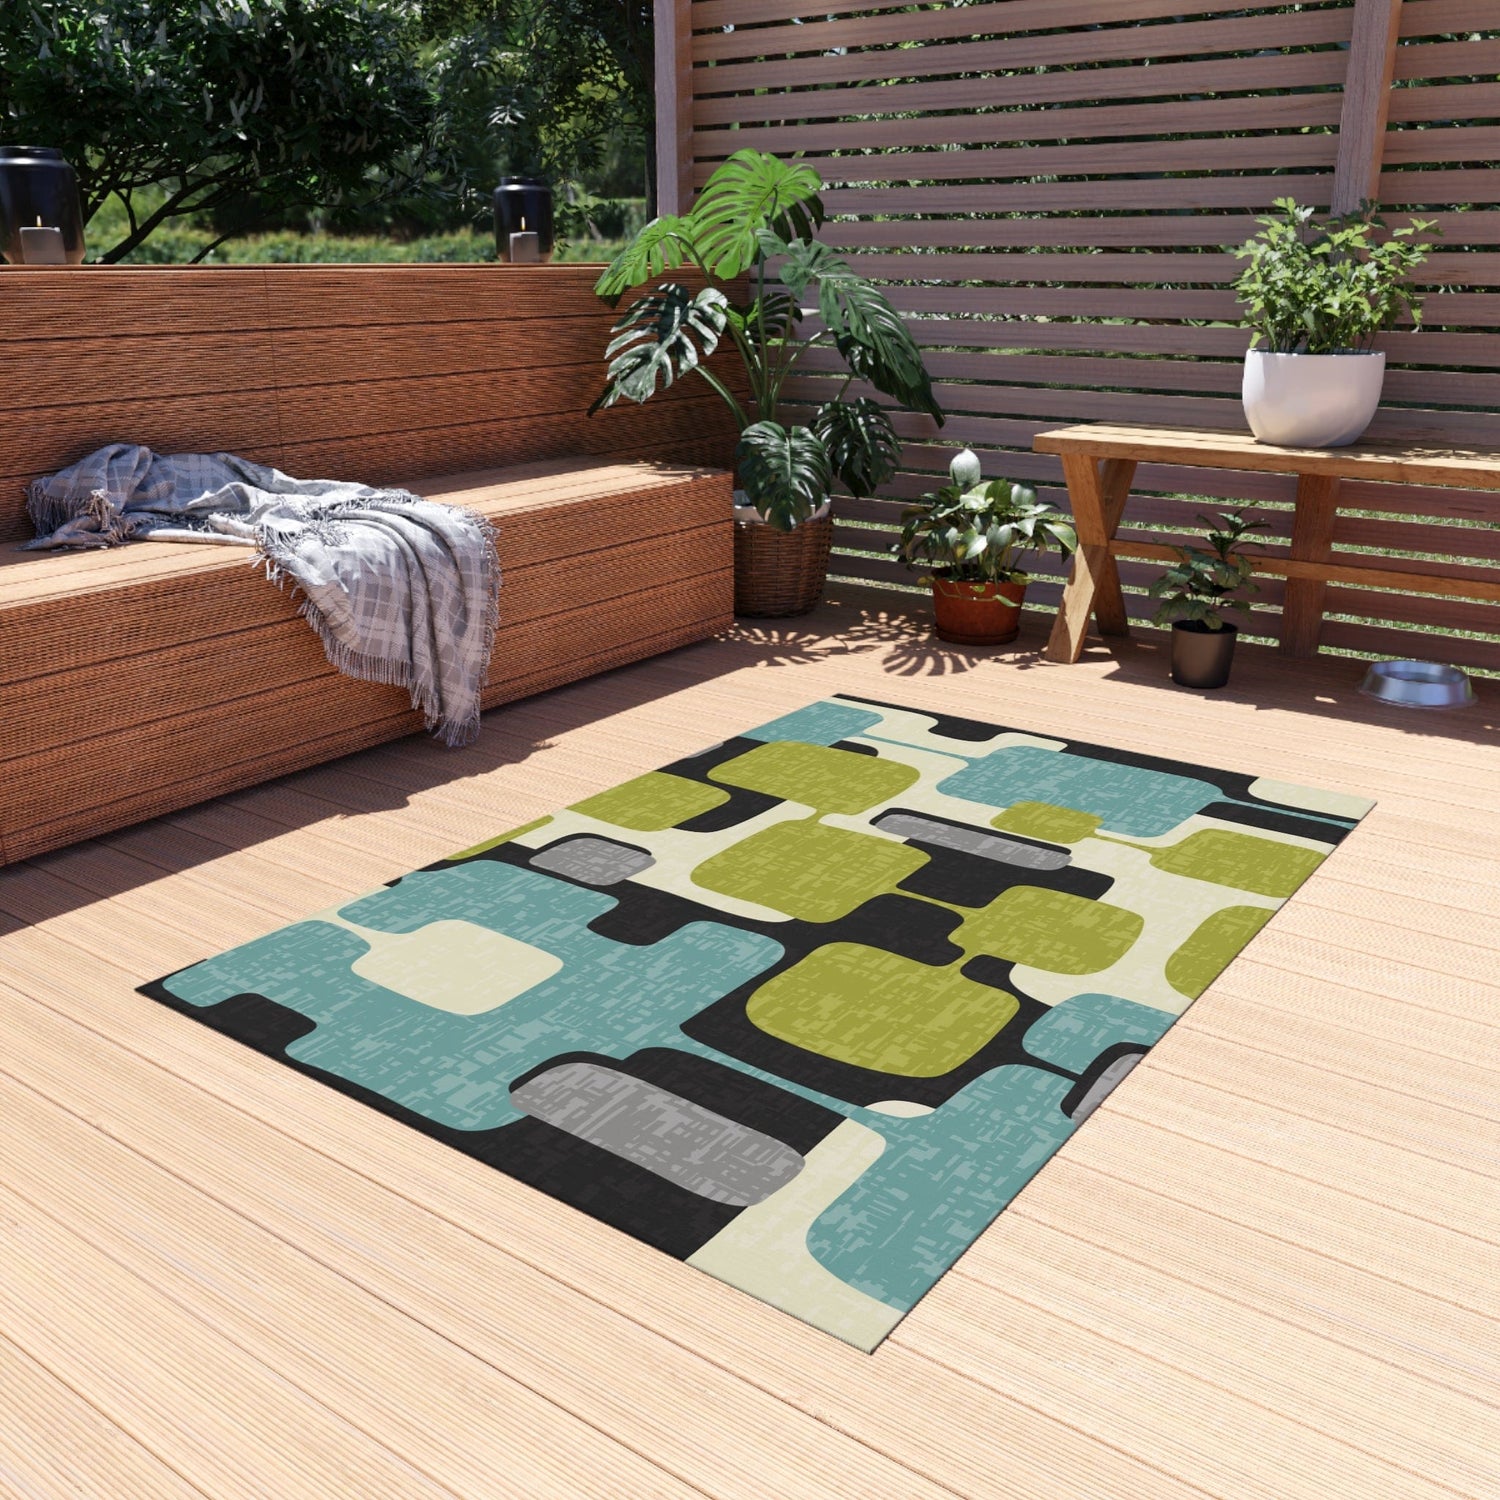 Kate McEnroe New York Retro Mid Century Modern Indoor - Outdoor Area Rug, MCM Teal, Lime Green, Gray, Cream Geometric Abstract Porch Patio Accent Rug Rugs 48&quot; × 72&quot; 90187581198179771243